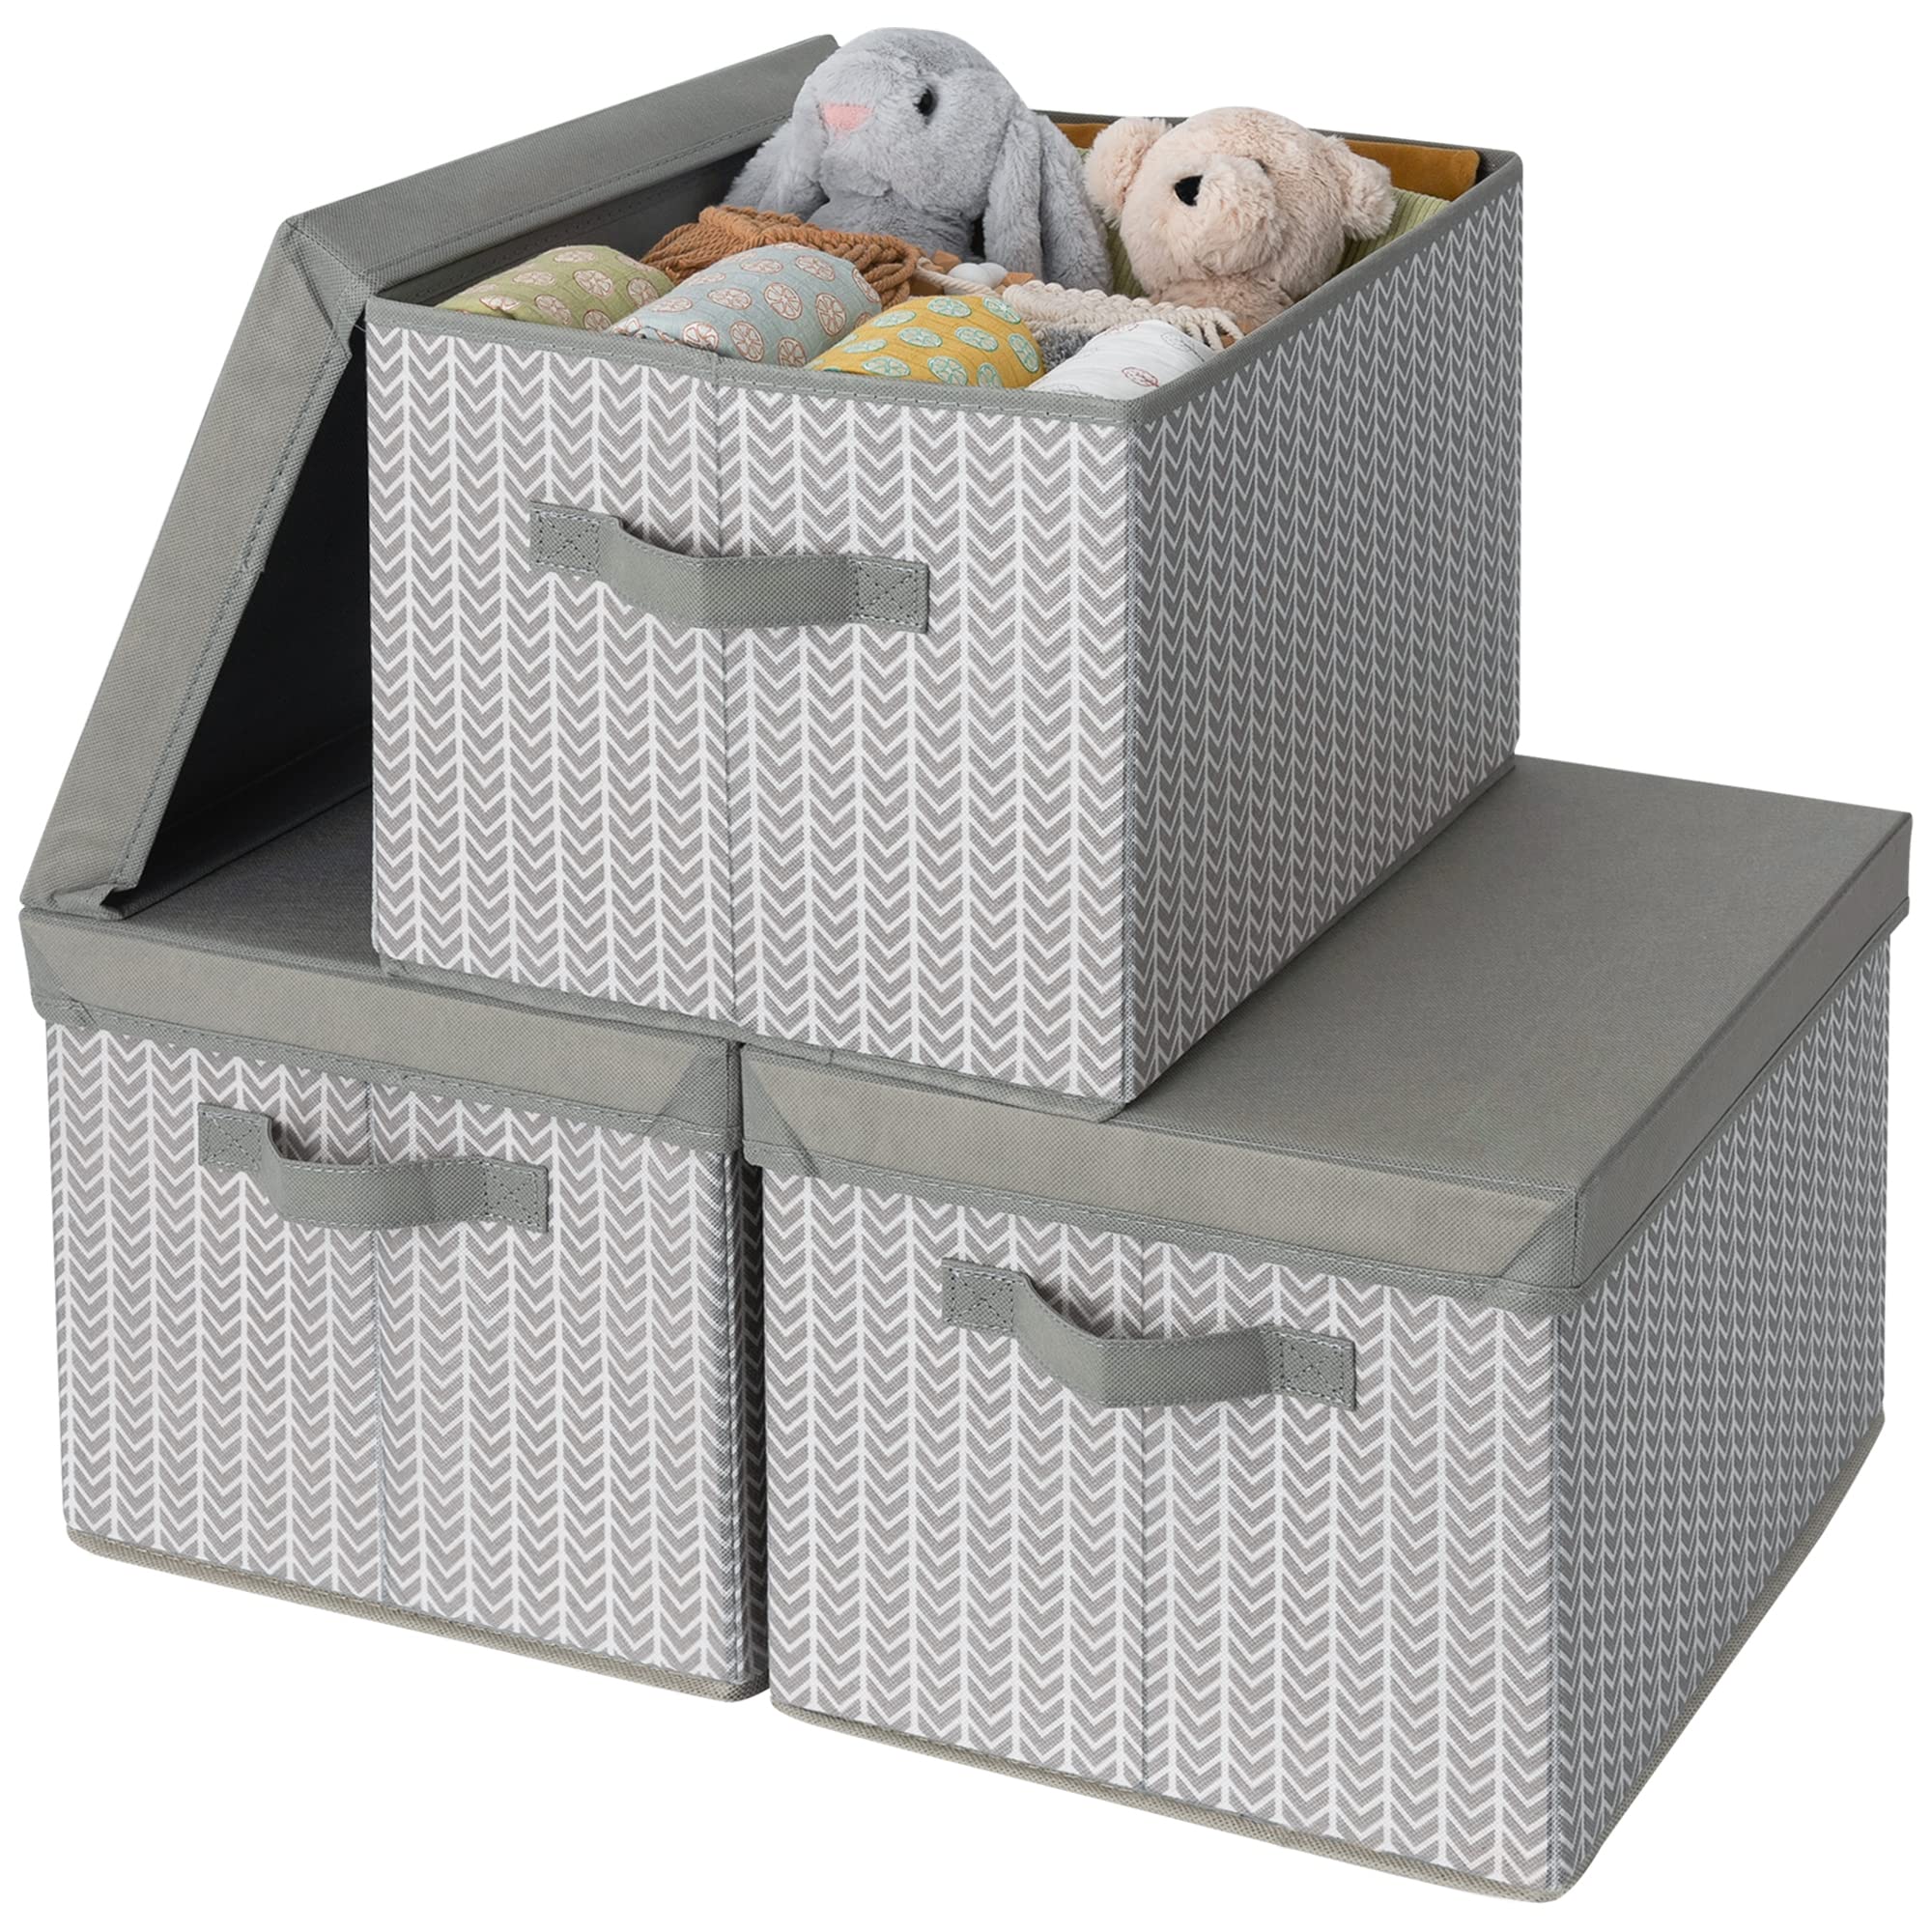 GRANNY SAYS Bundle of 3-Pack Cloth Storage Boxes & 2-Pack Wicker Baskets for Organizing